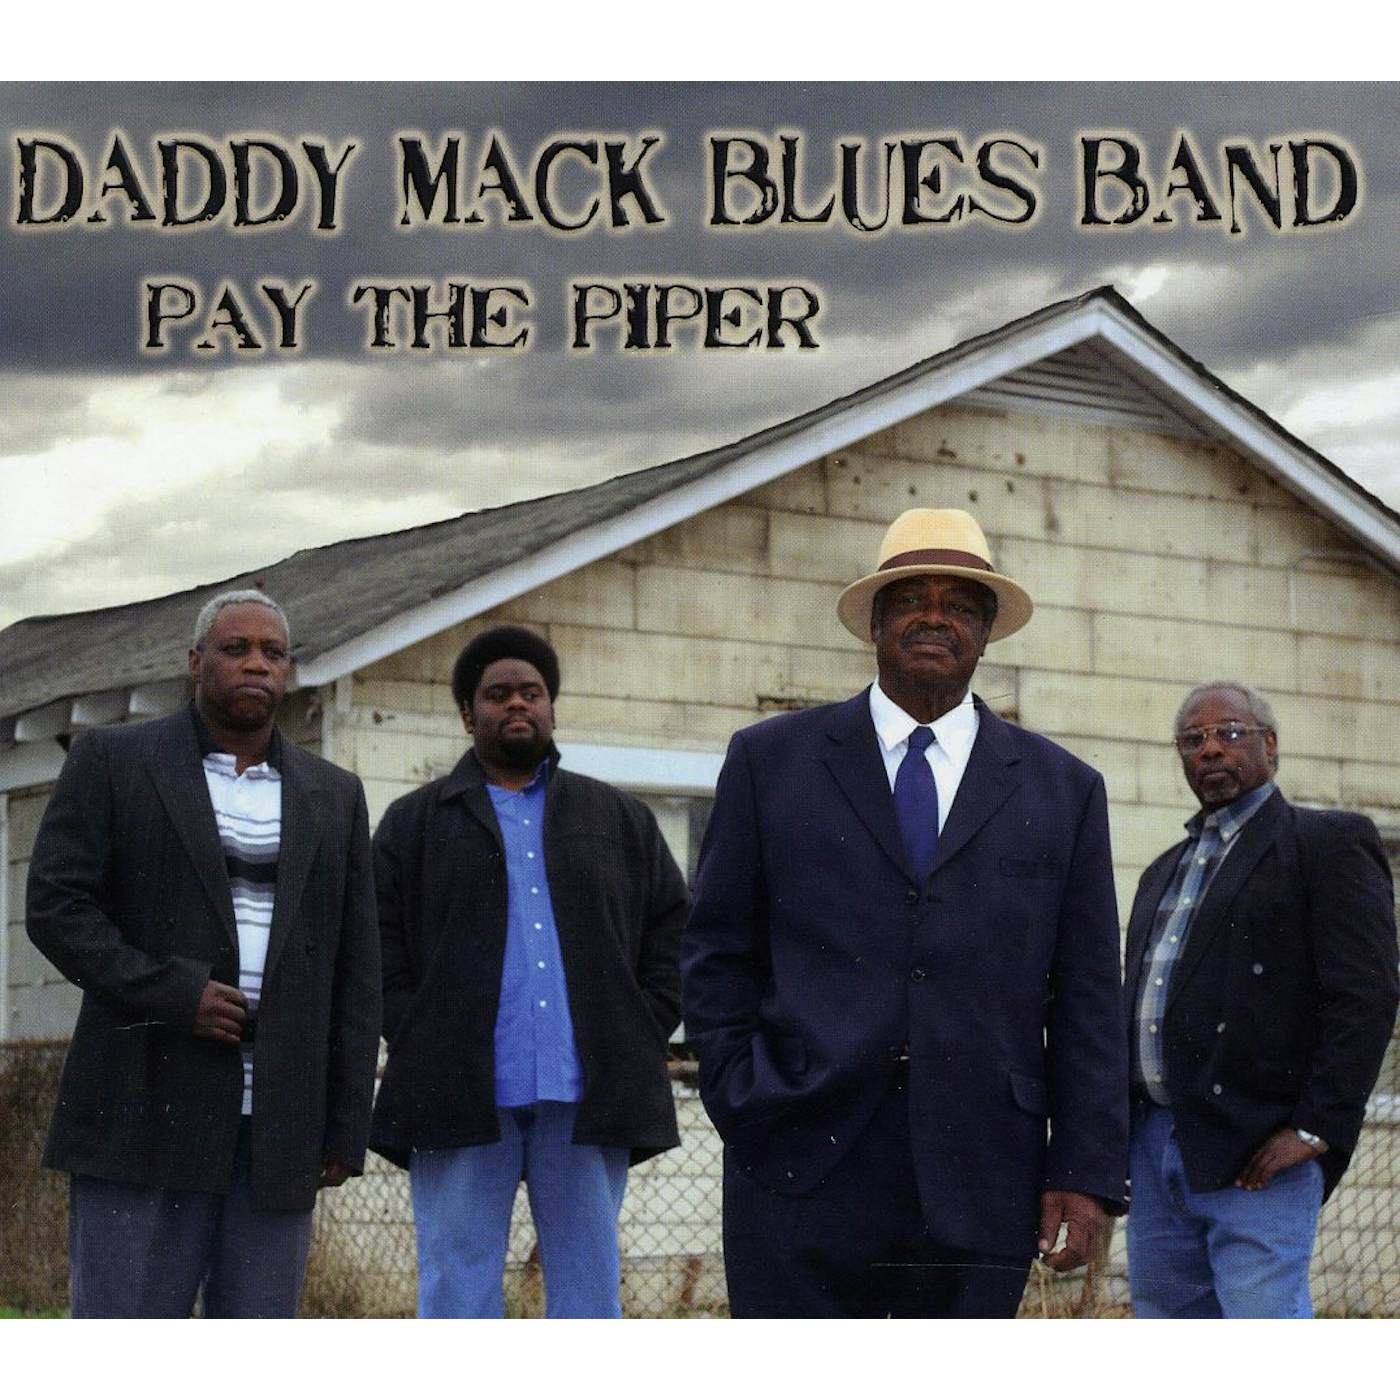 Daddy Mack Blues Band PAY THE PIPER CD